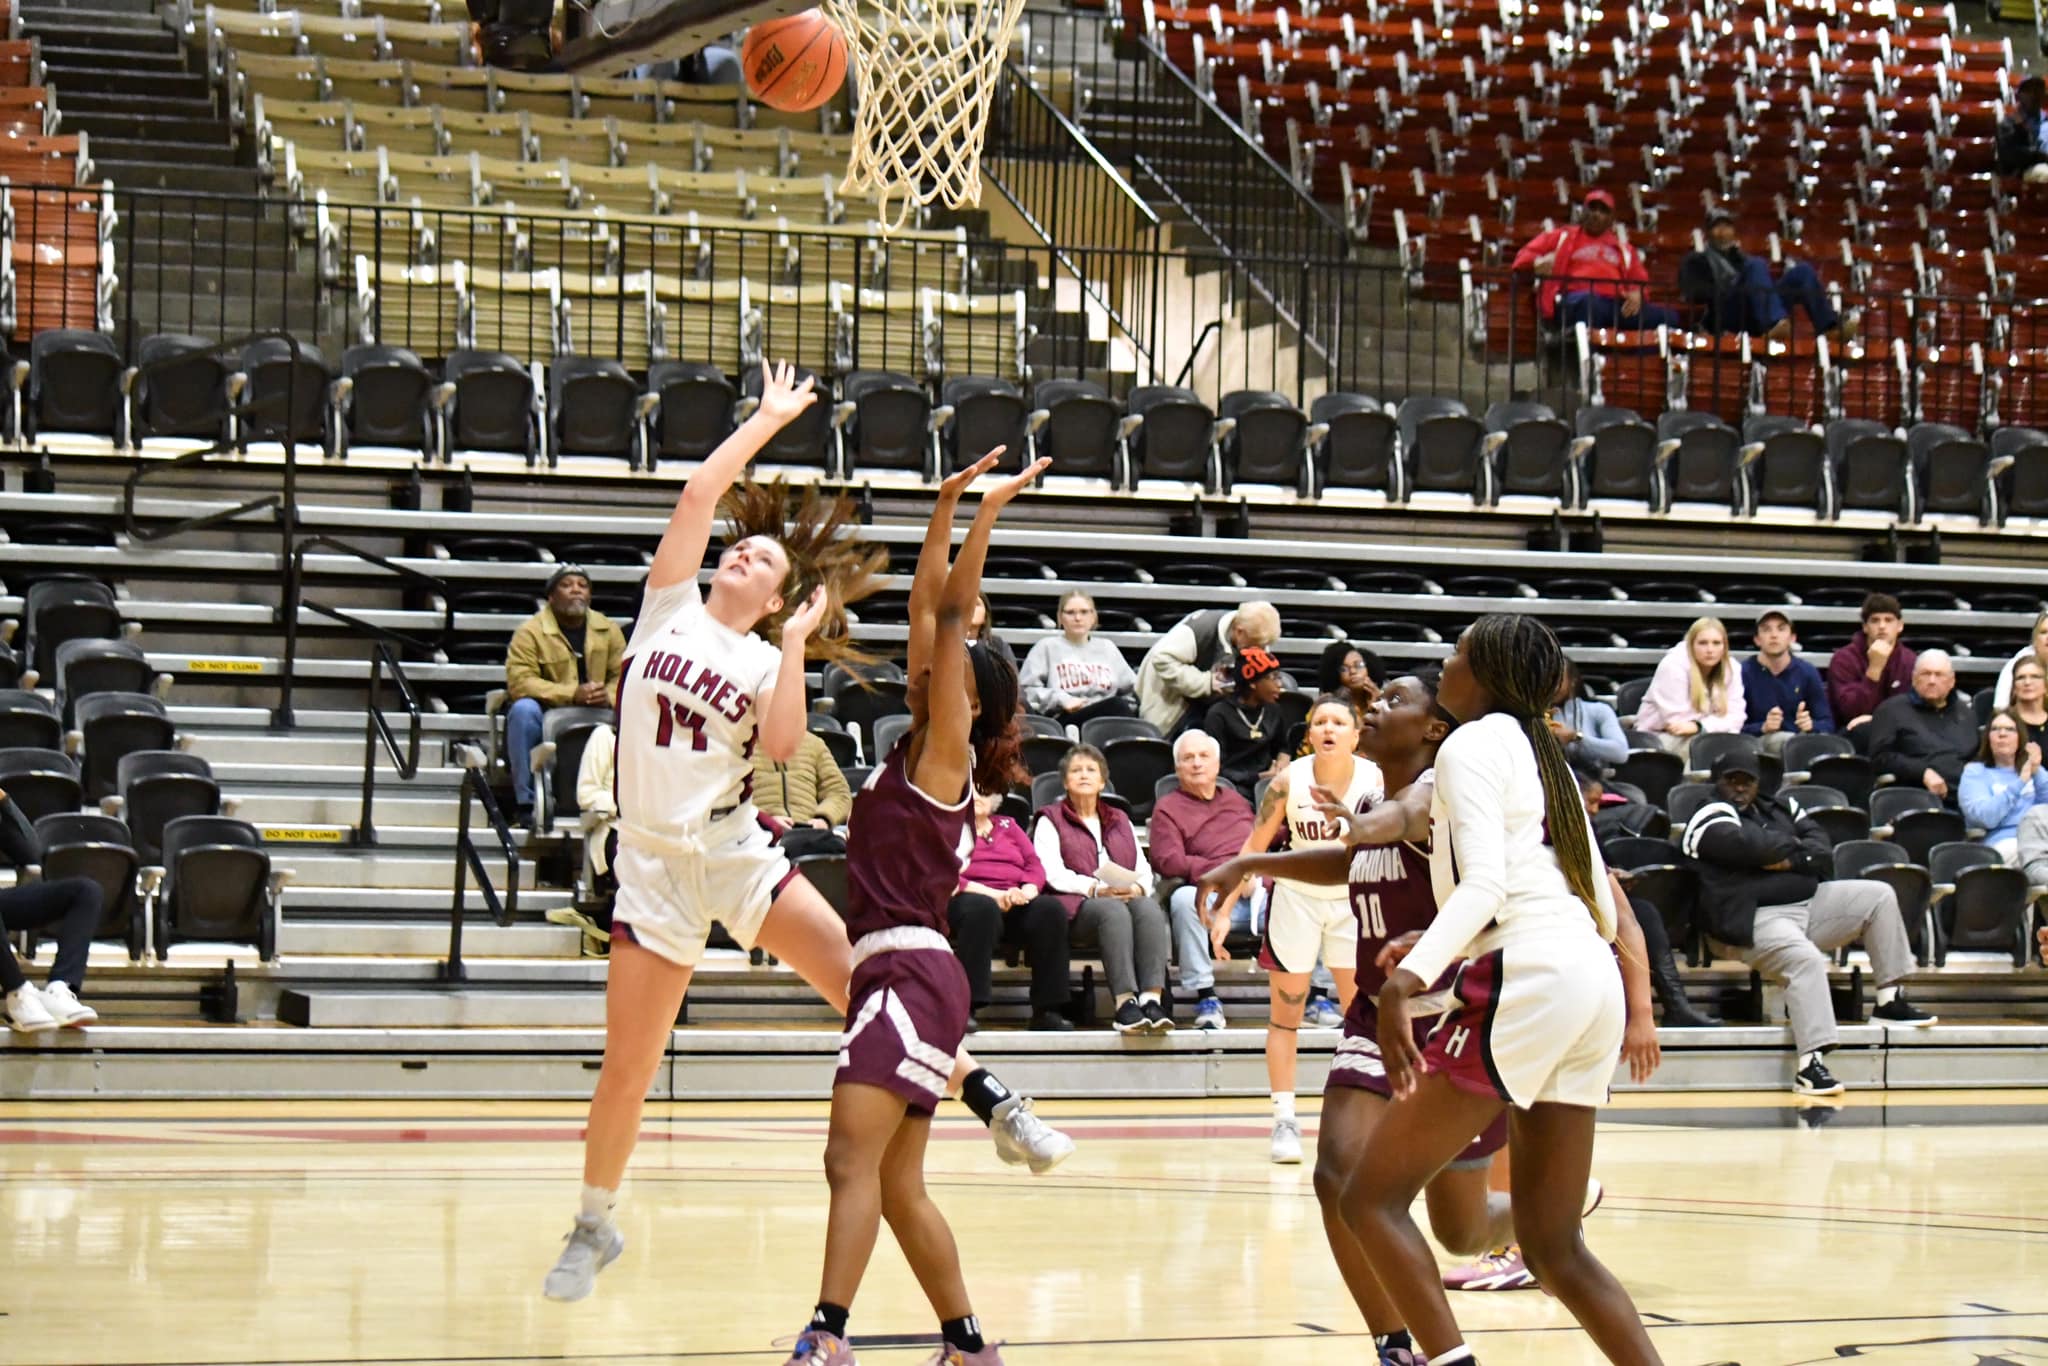 Lady Bulldogs finish season with win over Hinds, 76-66